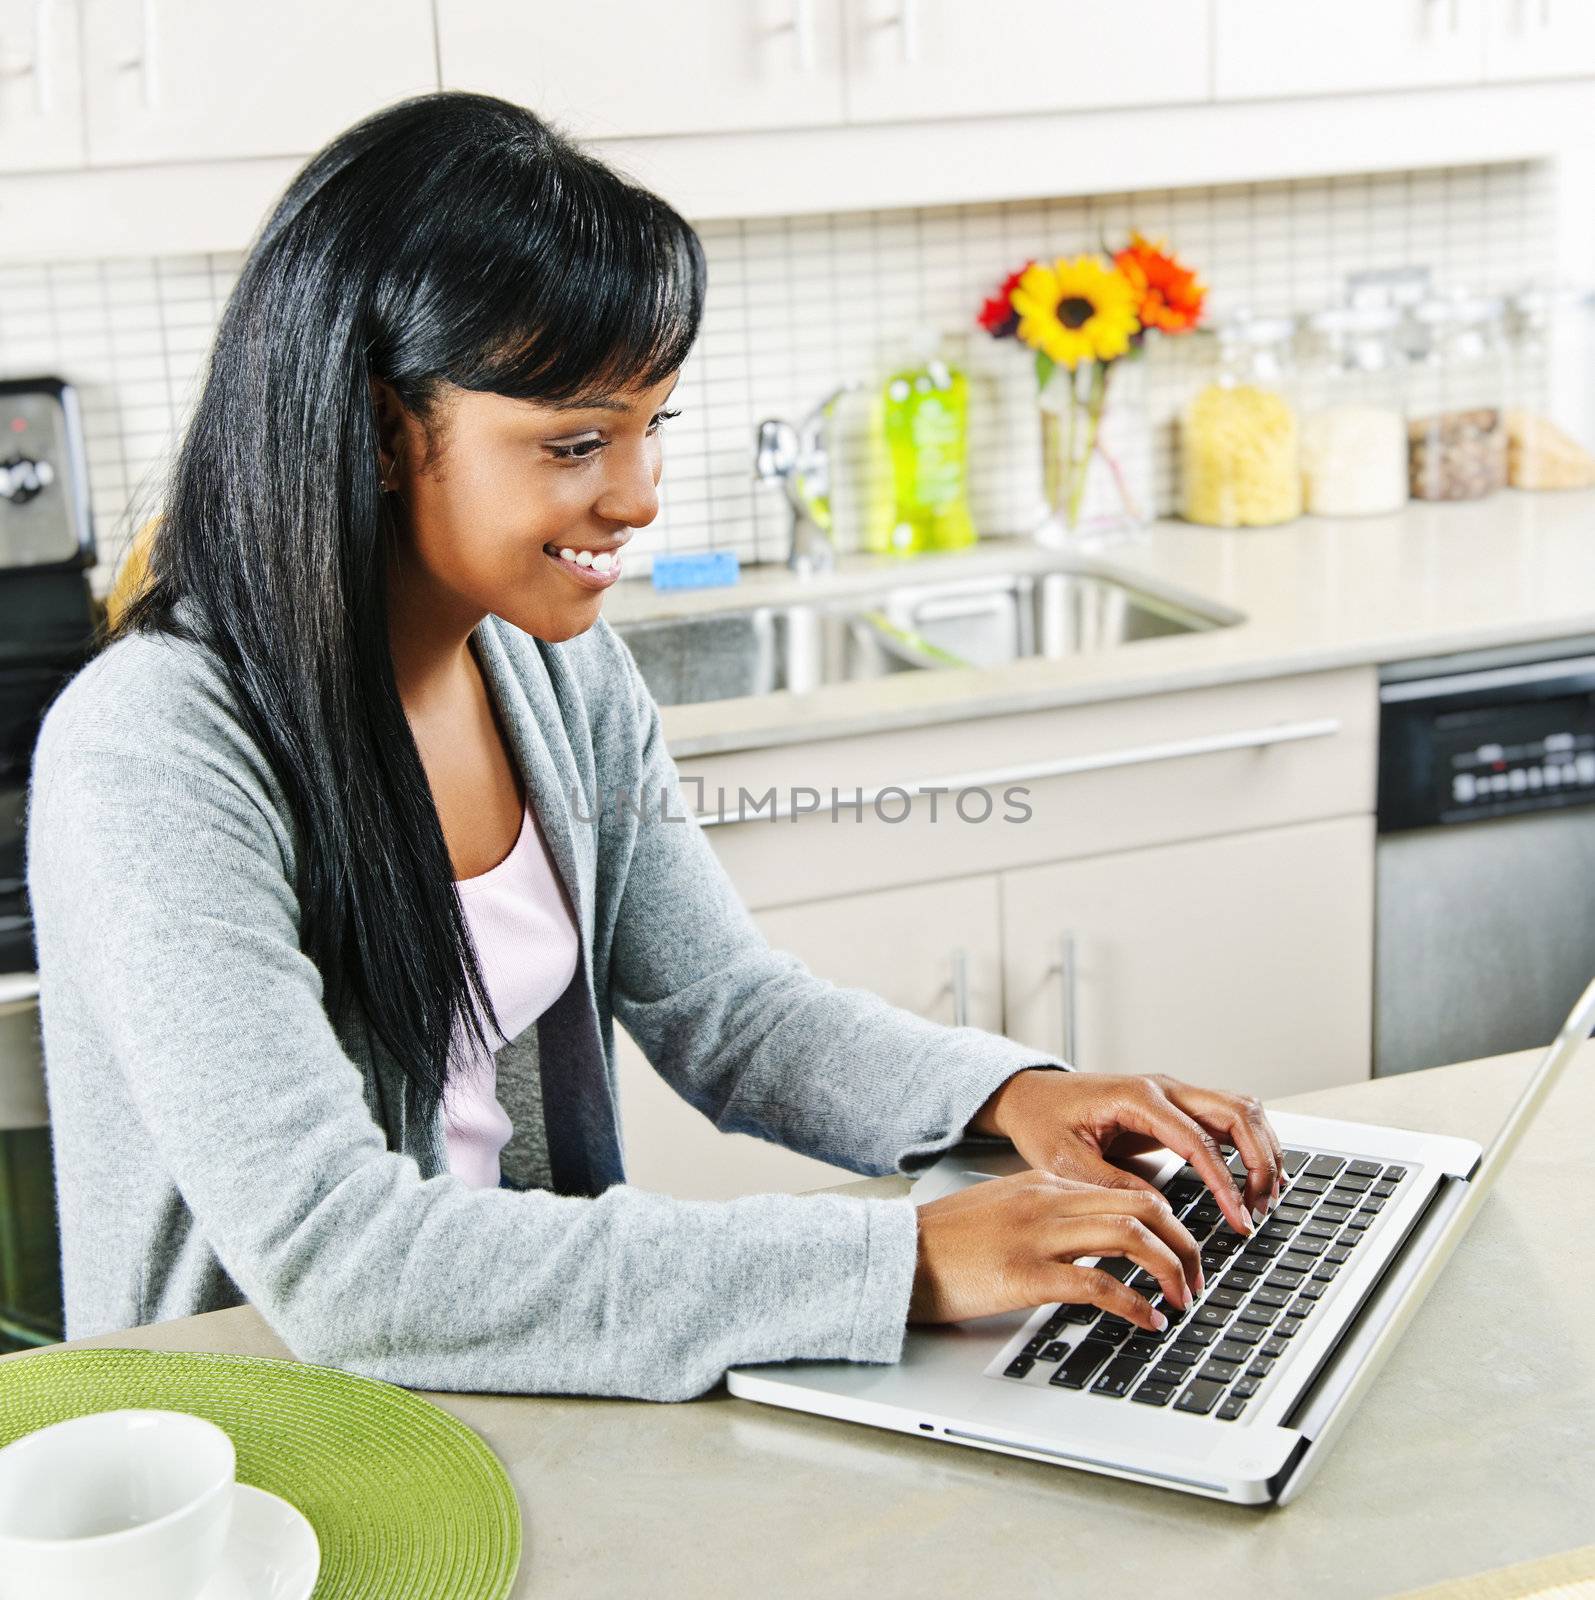 Young woman using computer in kitchen by elenathewise